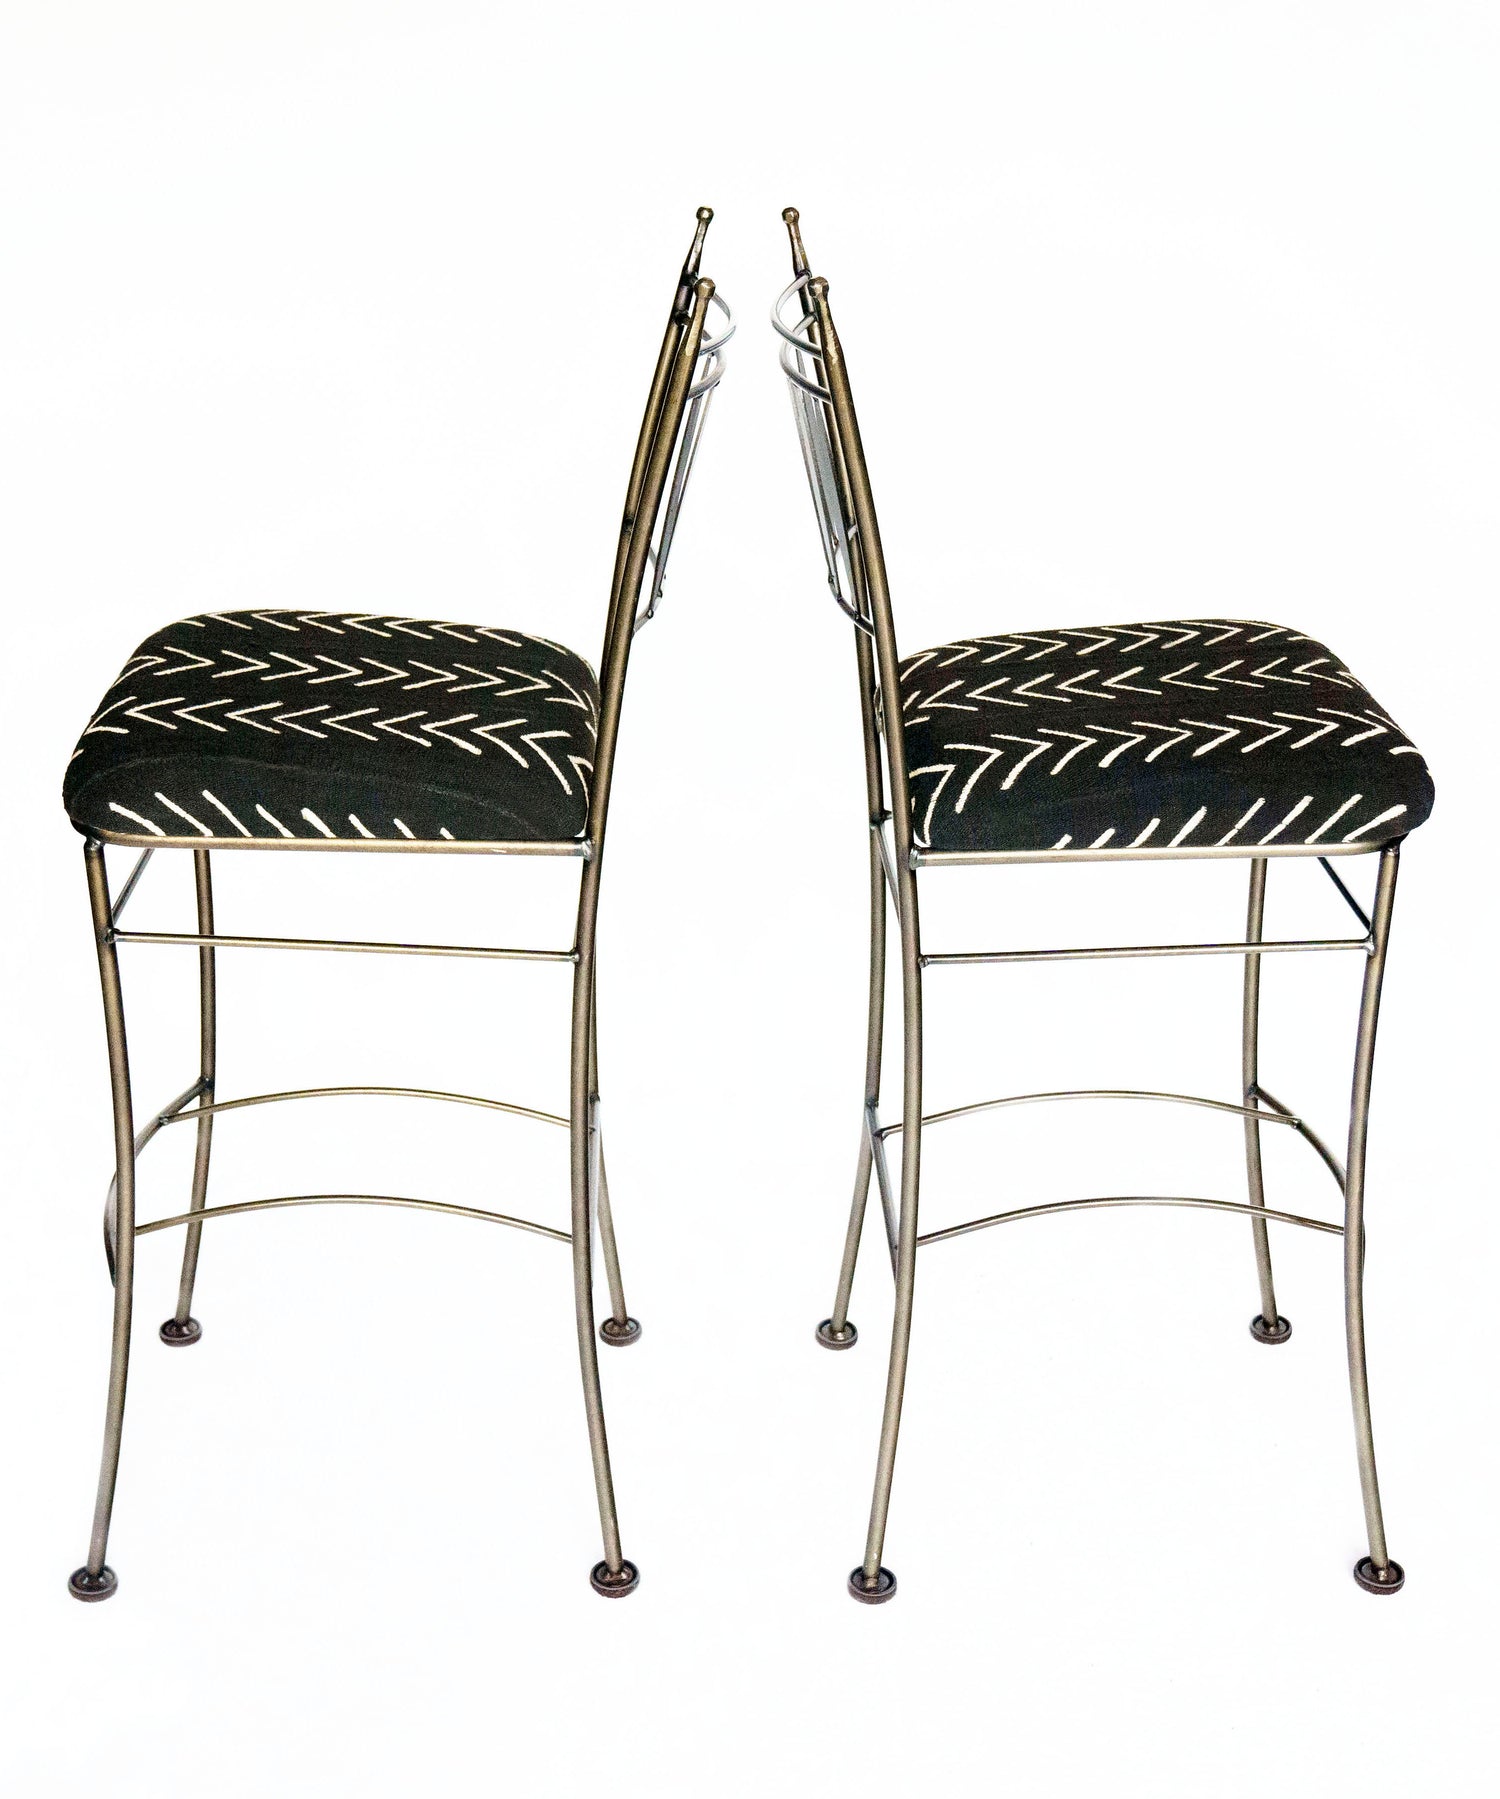 Two Hand-Forged Iron Bar Height Stools w/ Authentic Mali Bogolanfini (Mudcloth)